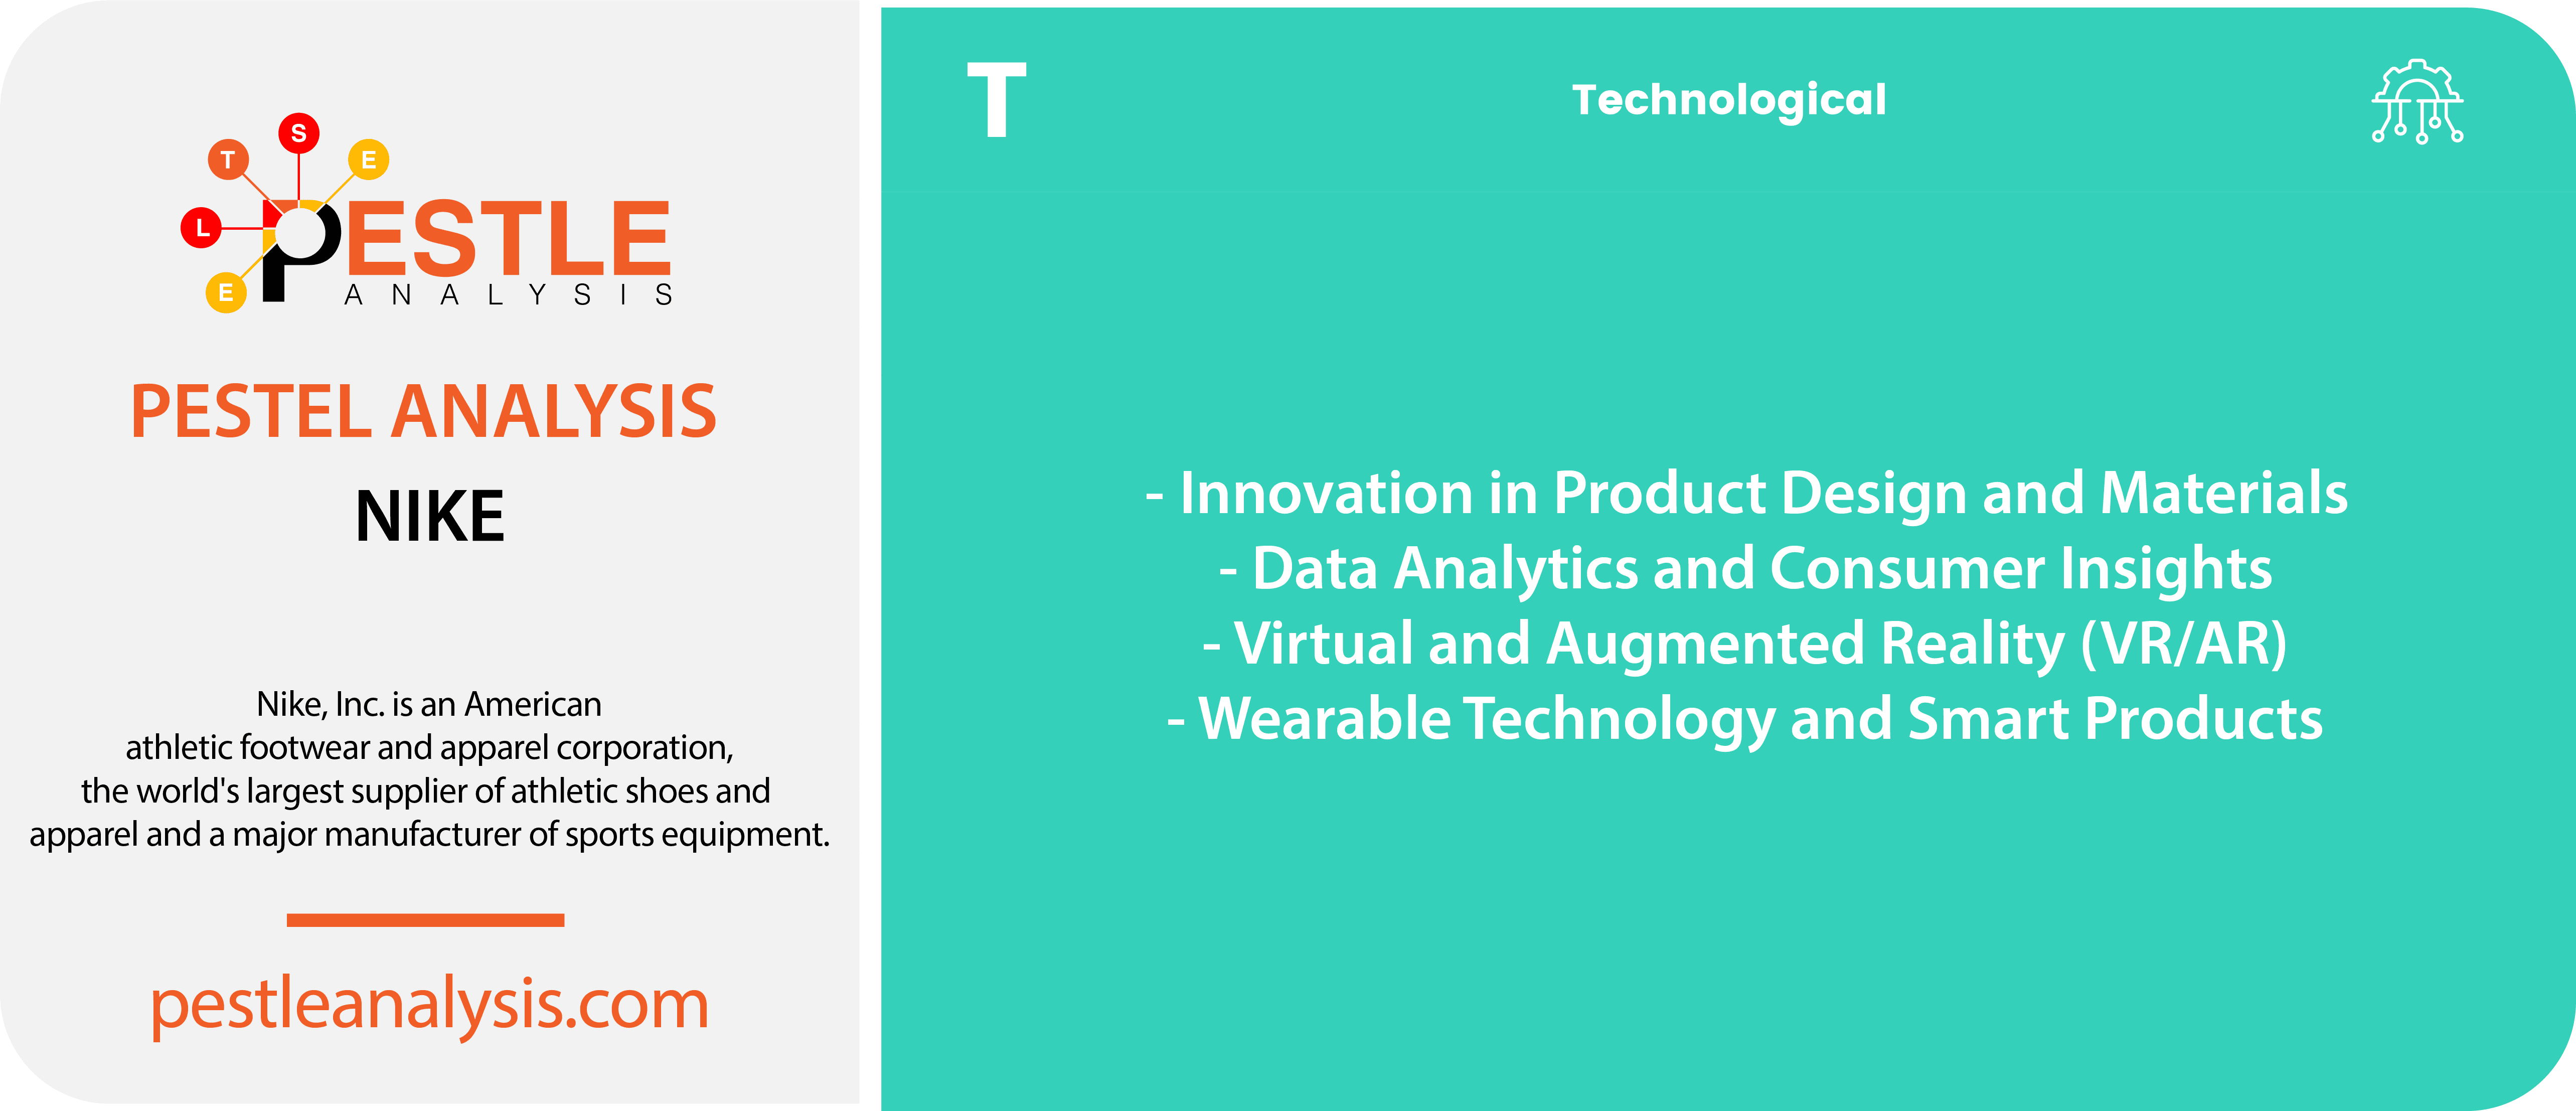 nike-pestle-analysis-technological-factors-template